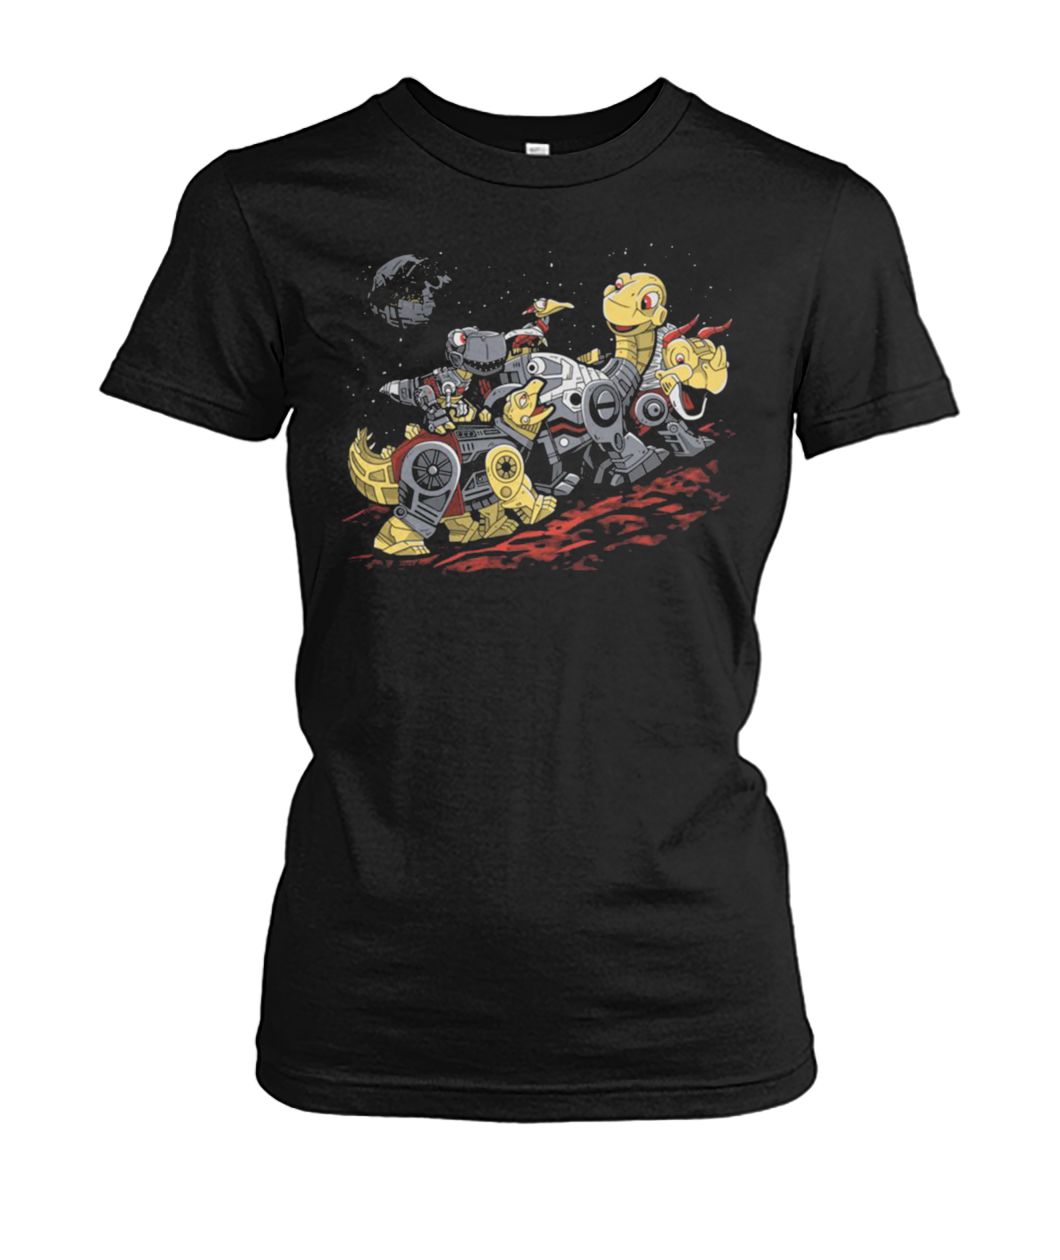 Bots before time transformers and the land before time women's crew tee